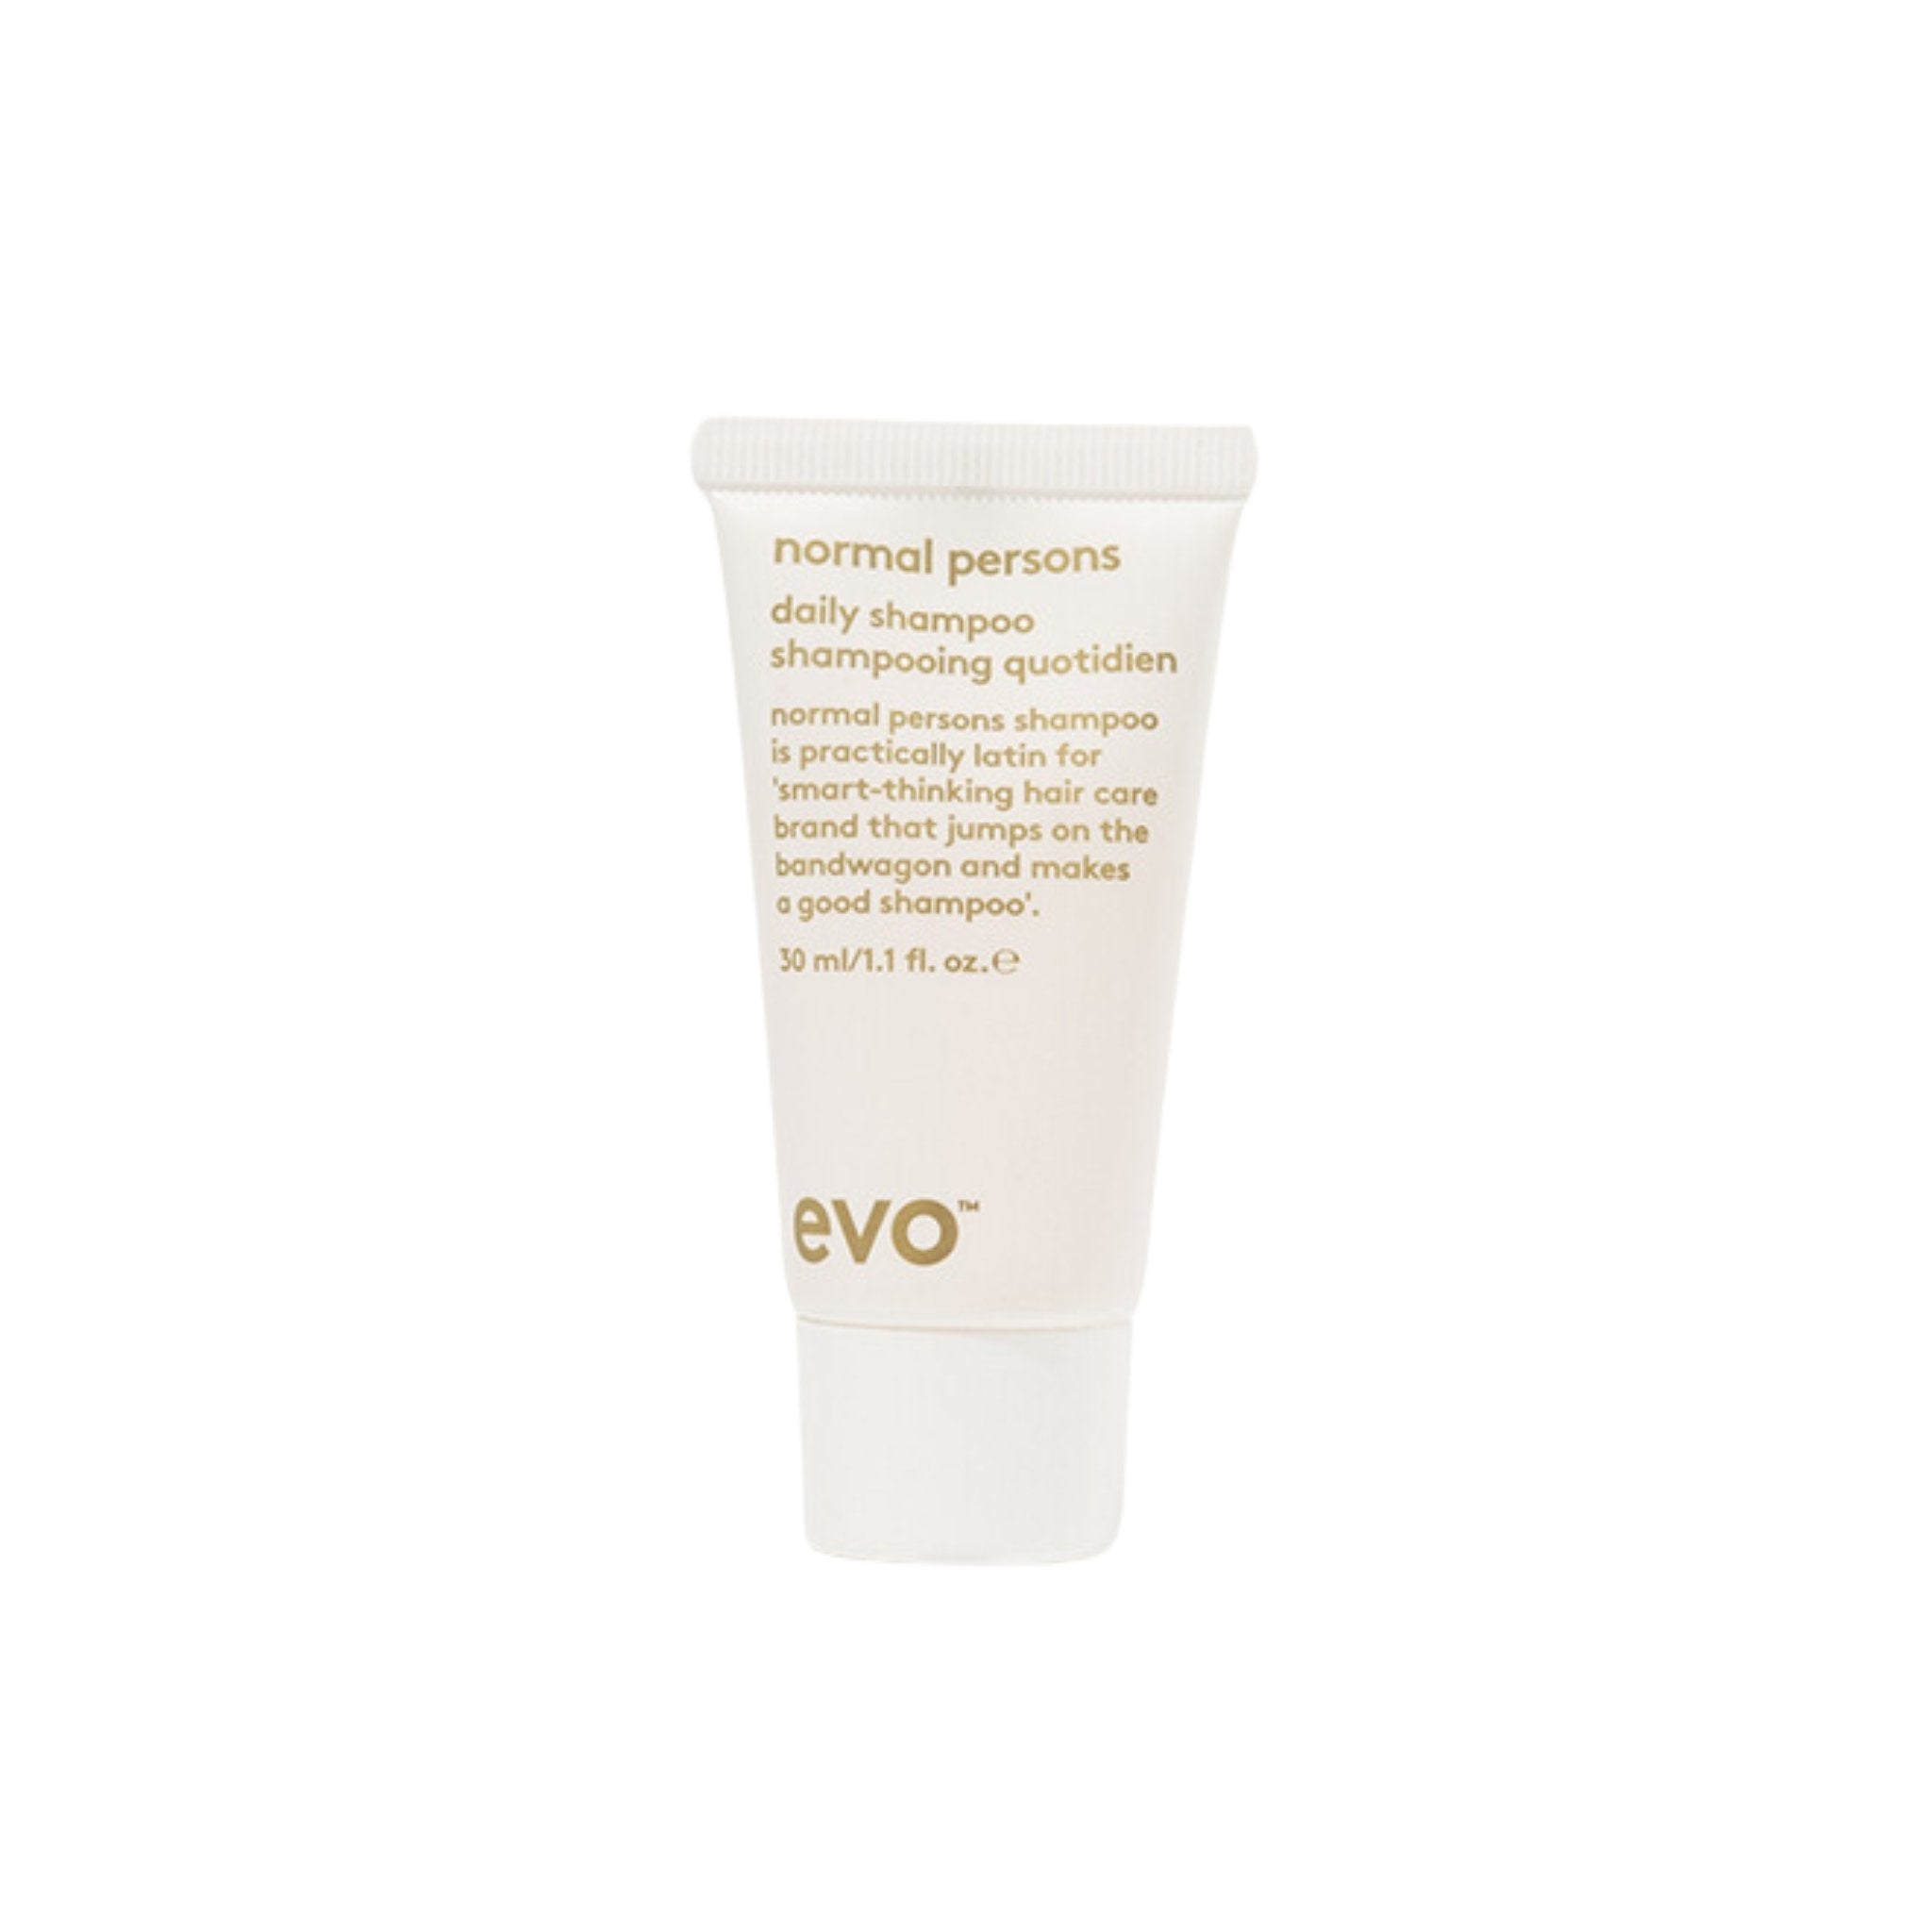 Evo. Normal Persons Shampoing Quotidien - 30 ml - Concept C. Shop